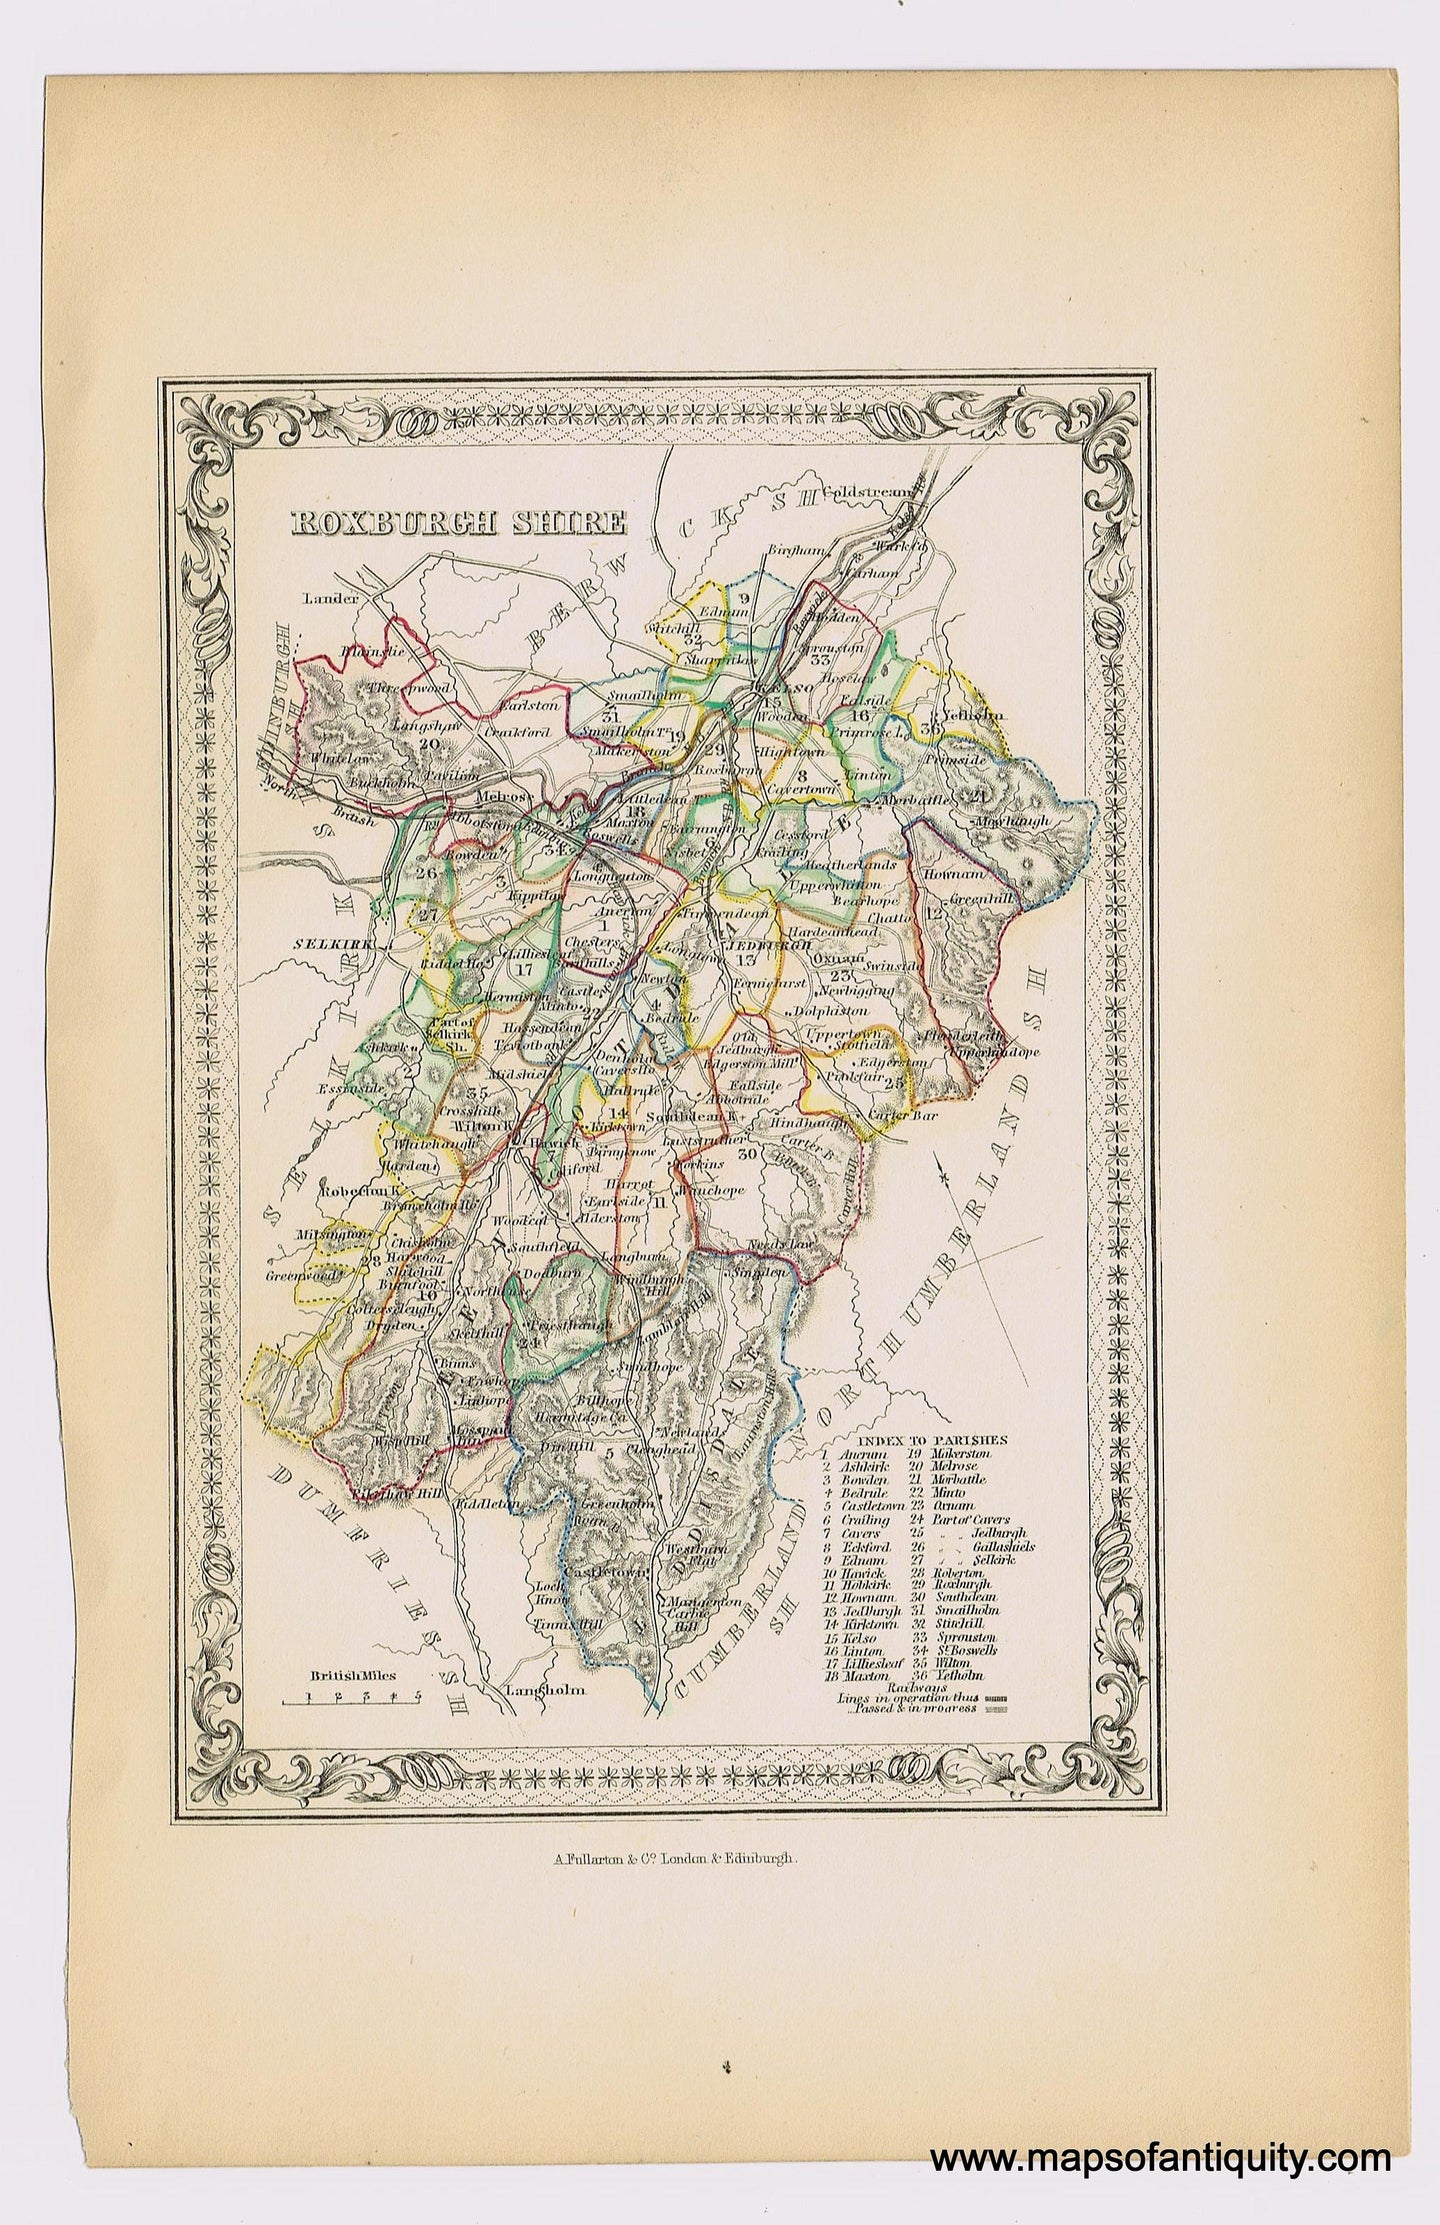 Genuine-Antique-Hand-colored-Map-Roxburgh-Shire-1855-A-Fullarton-Co--Maps-Of-Antiquity